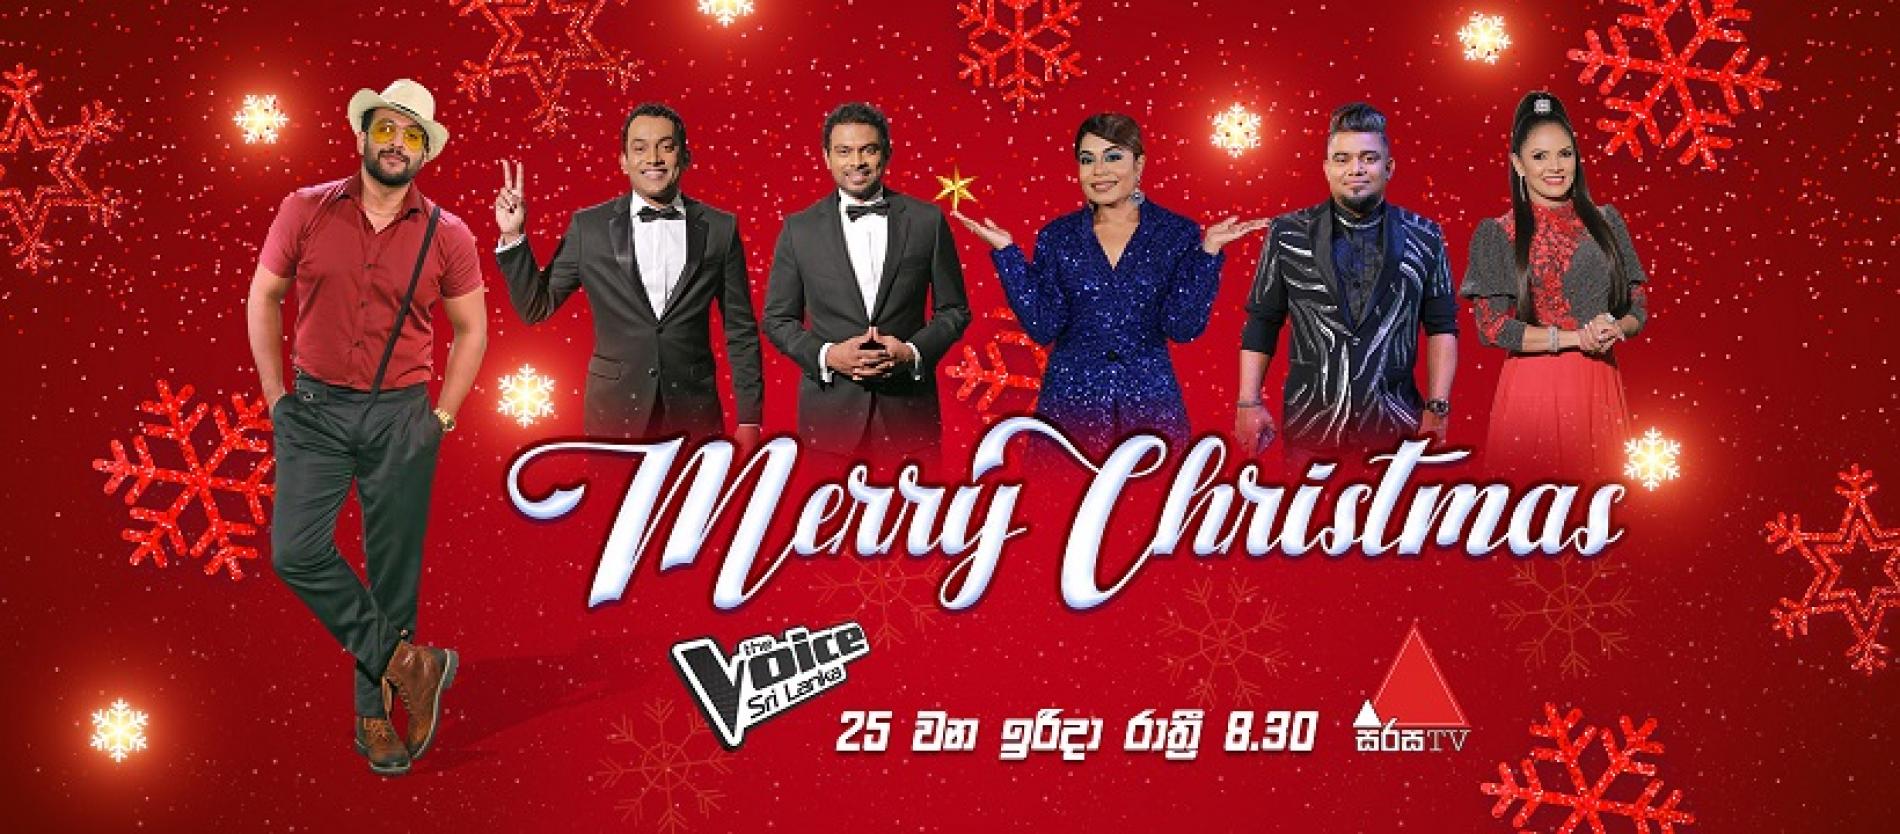 News : The Voice Sri Lanka Has Their First Christmas Special!